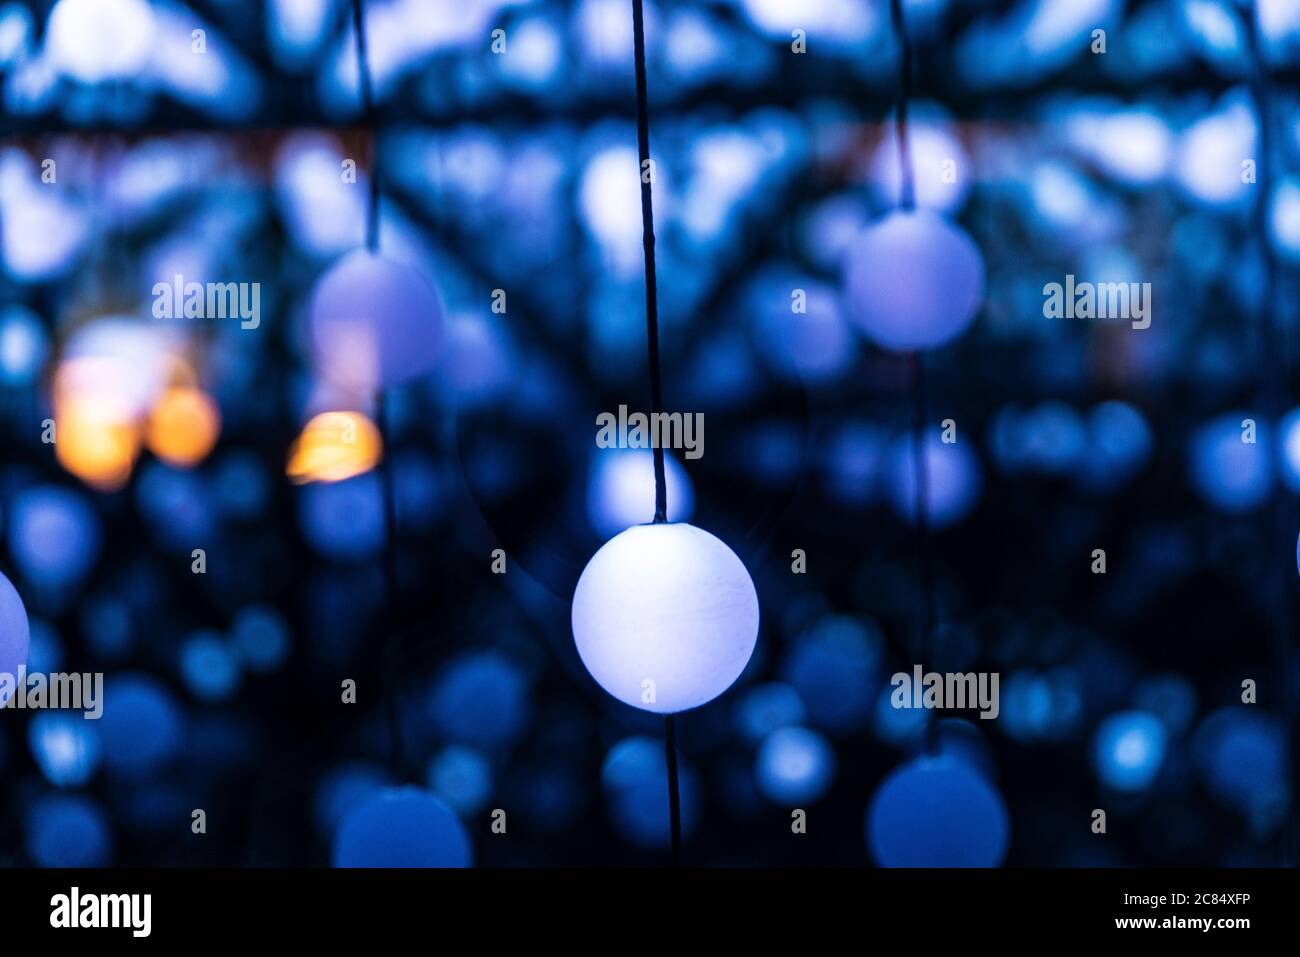 Many illuminated balls hung and linked by threads creating an infinite perspective as abstract blue background Stock Photo